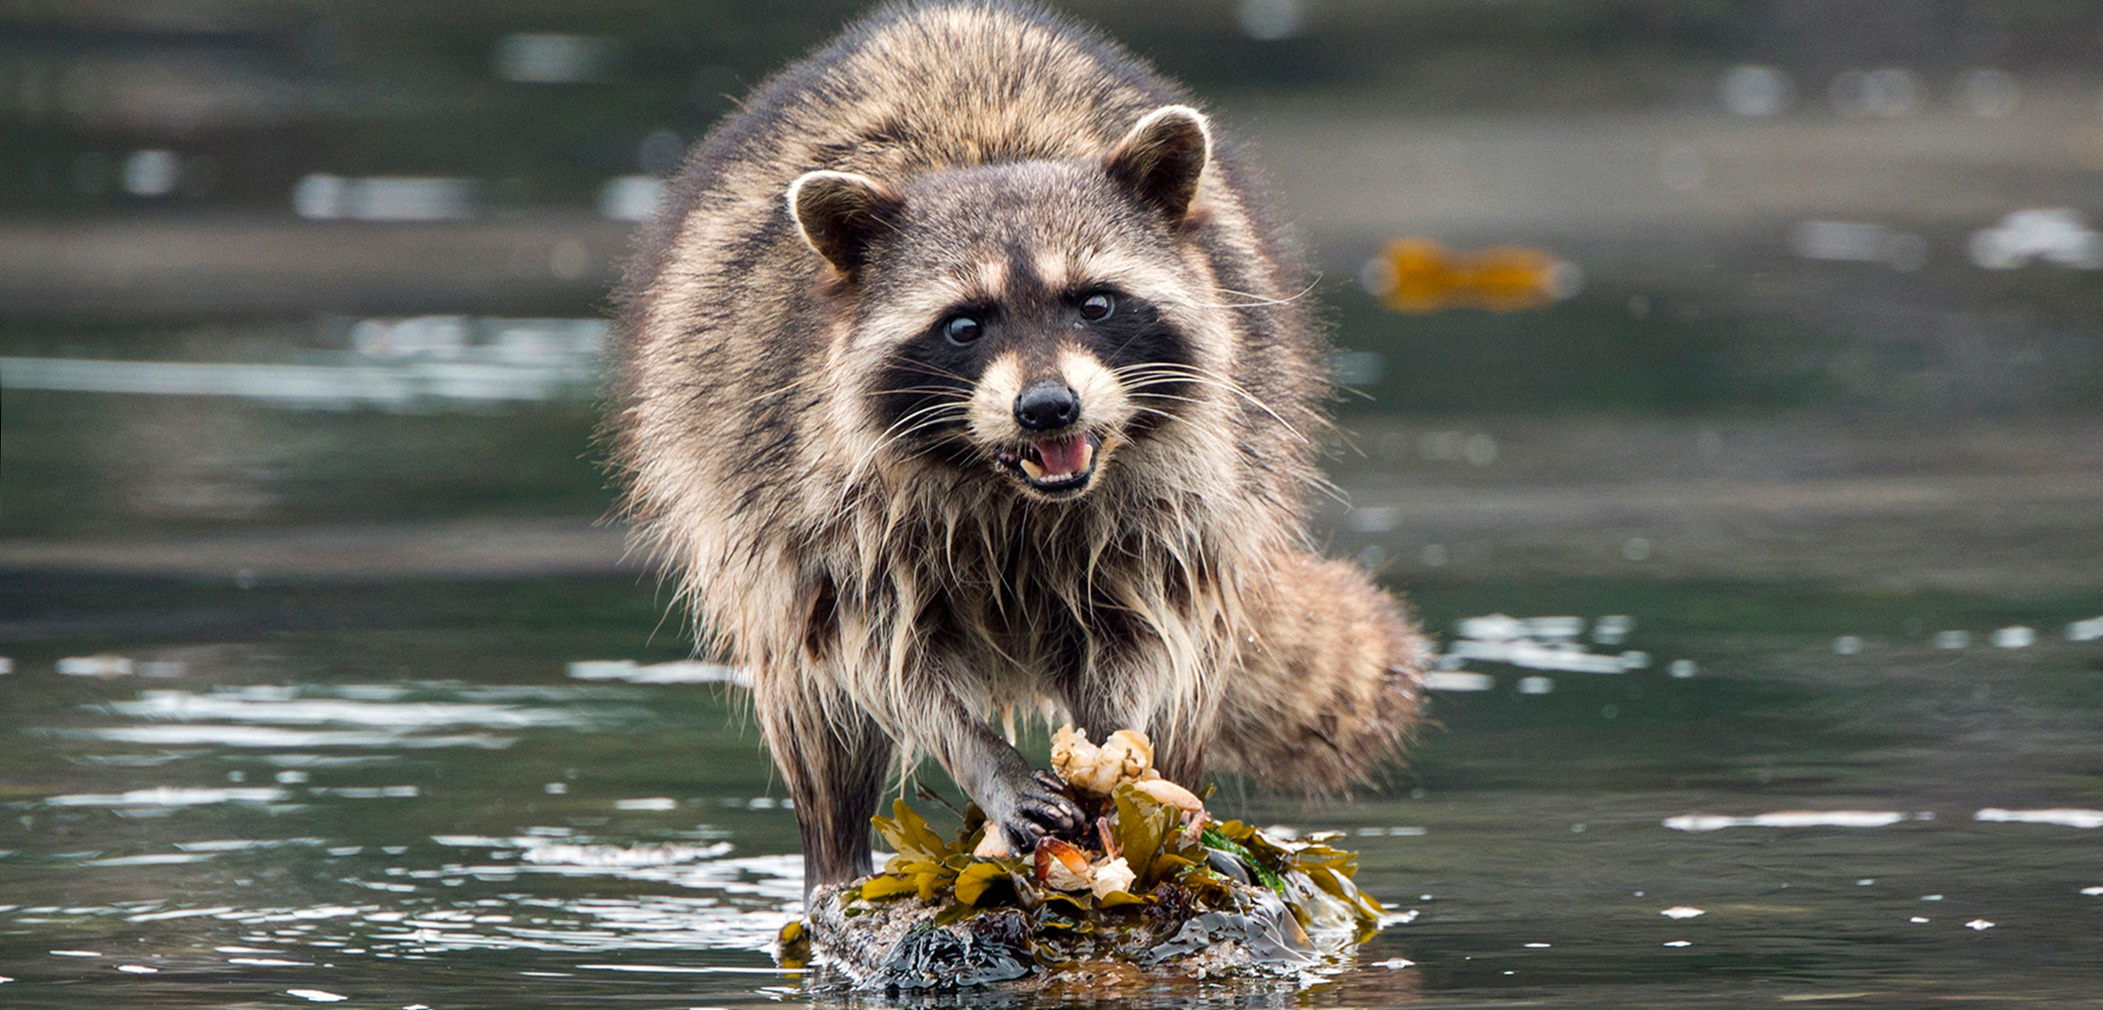 The living is easy, too easy, for raccoons living on islands with no predators. Photo by Shanna Baker